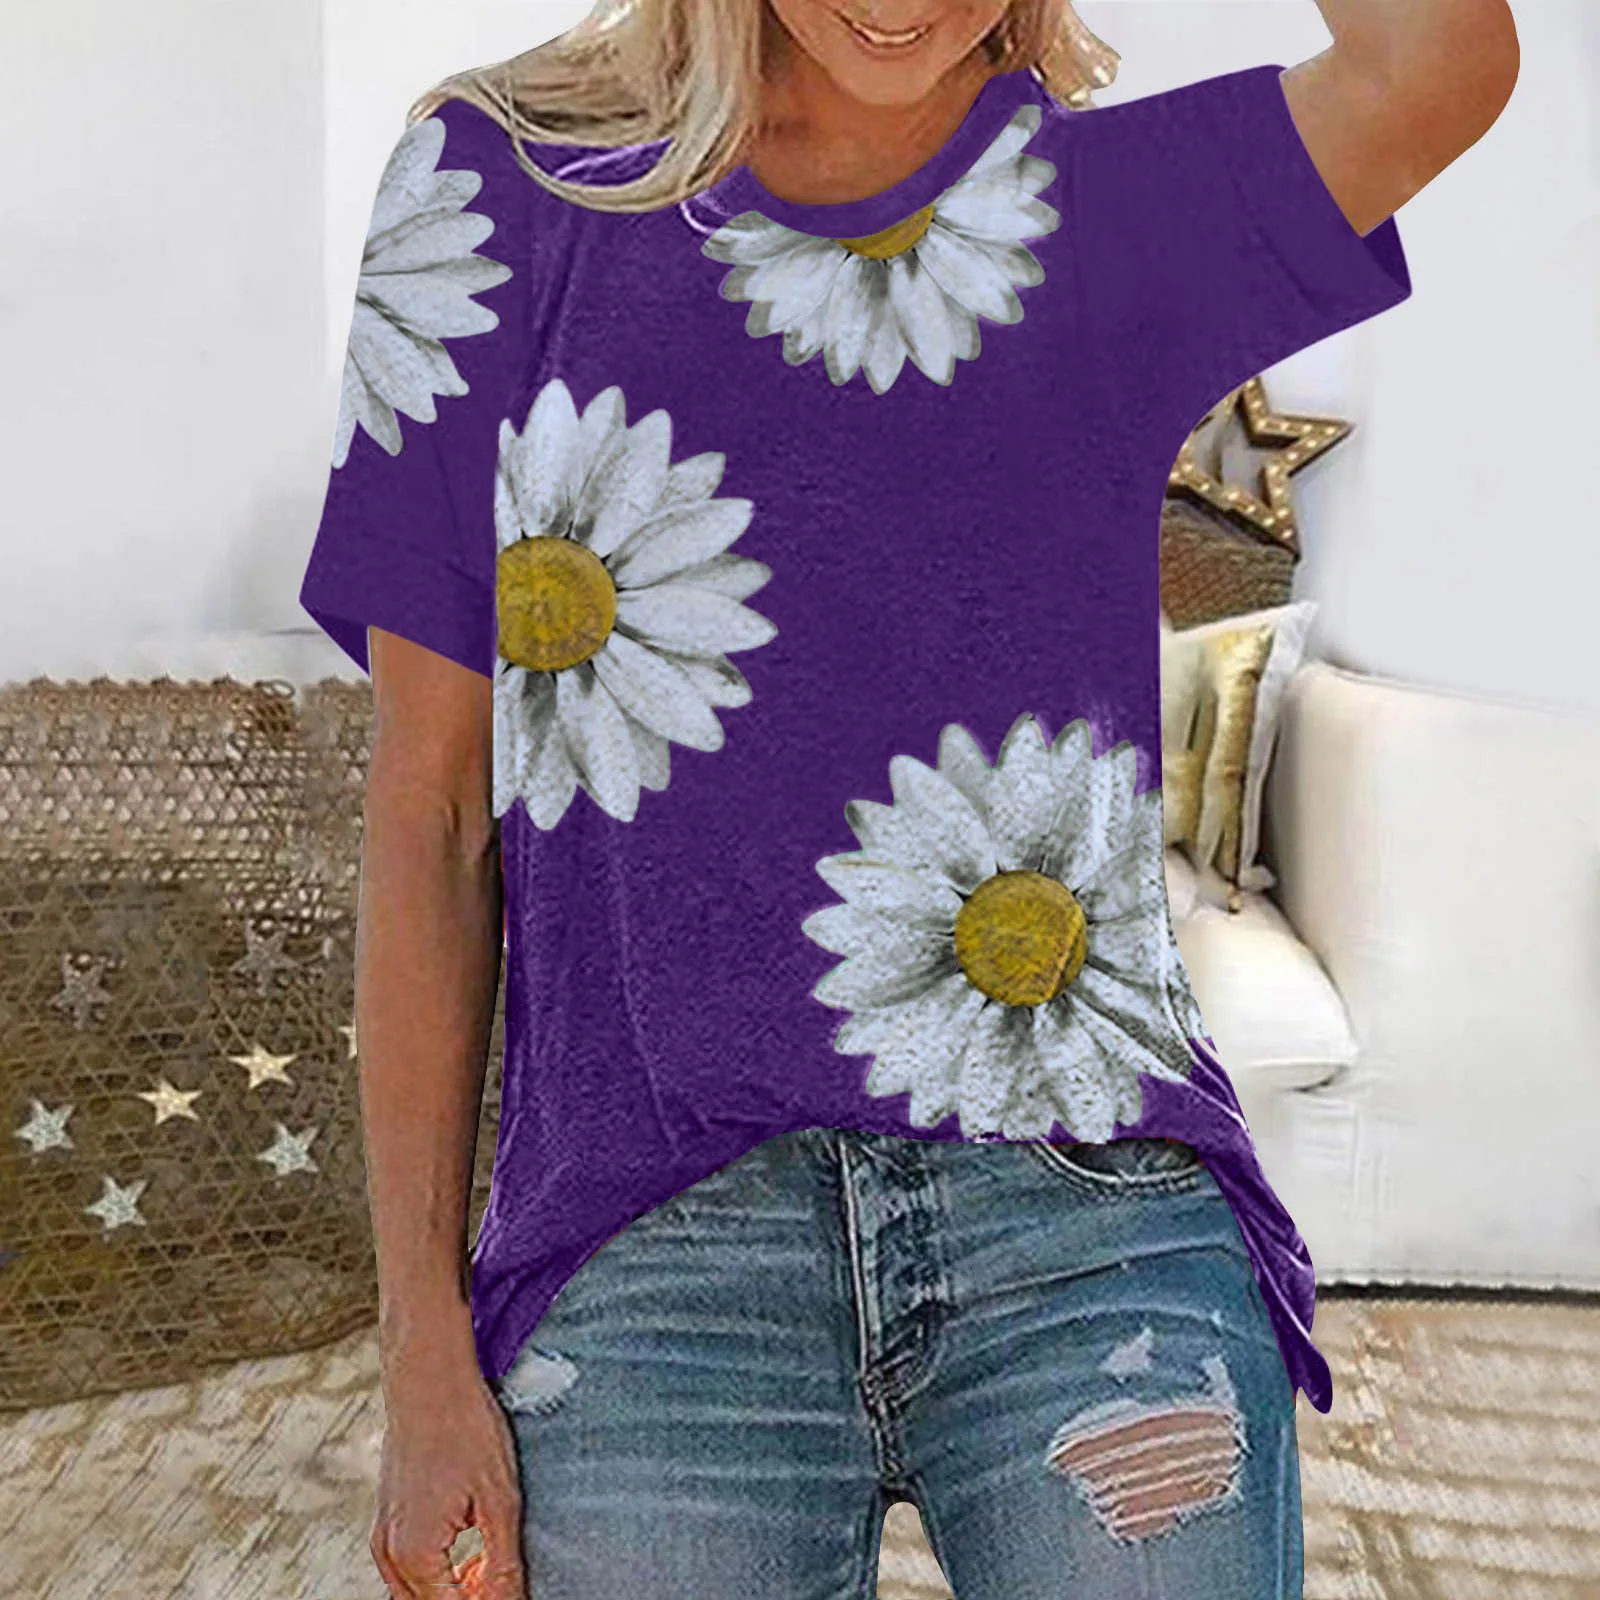 

Summer Fashion Women's Small Daisy Digital Printing Round Neck Women's T-Shirt Top Casual Commuter Versatile Top Lady